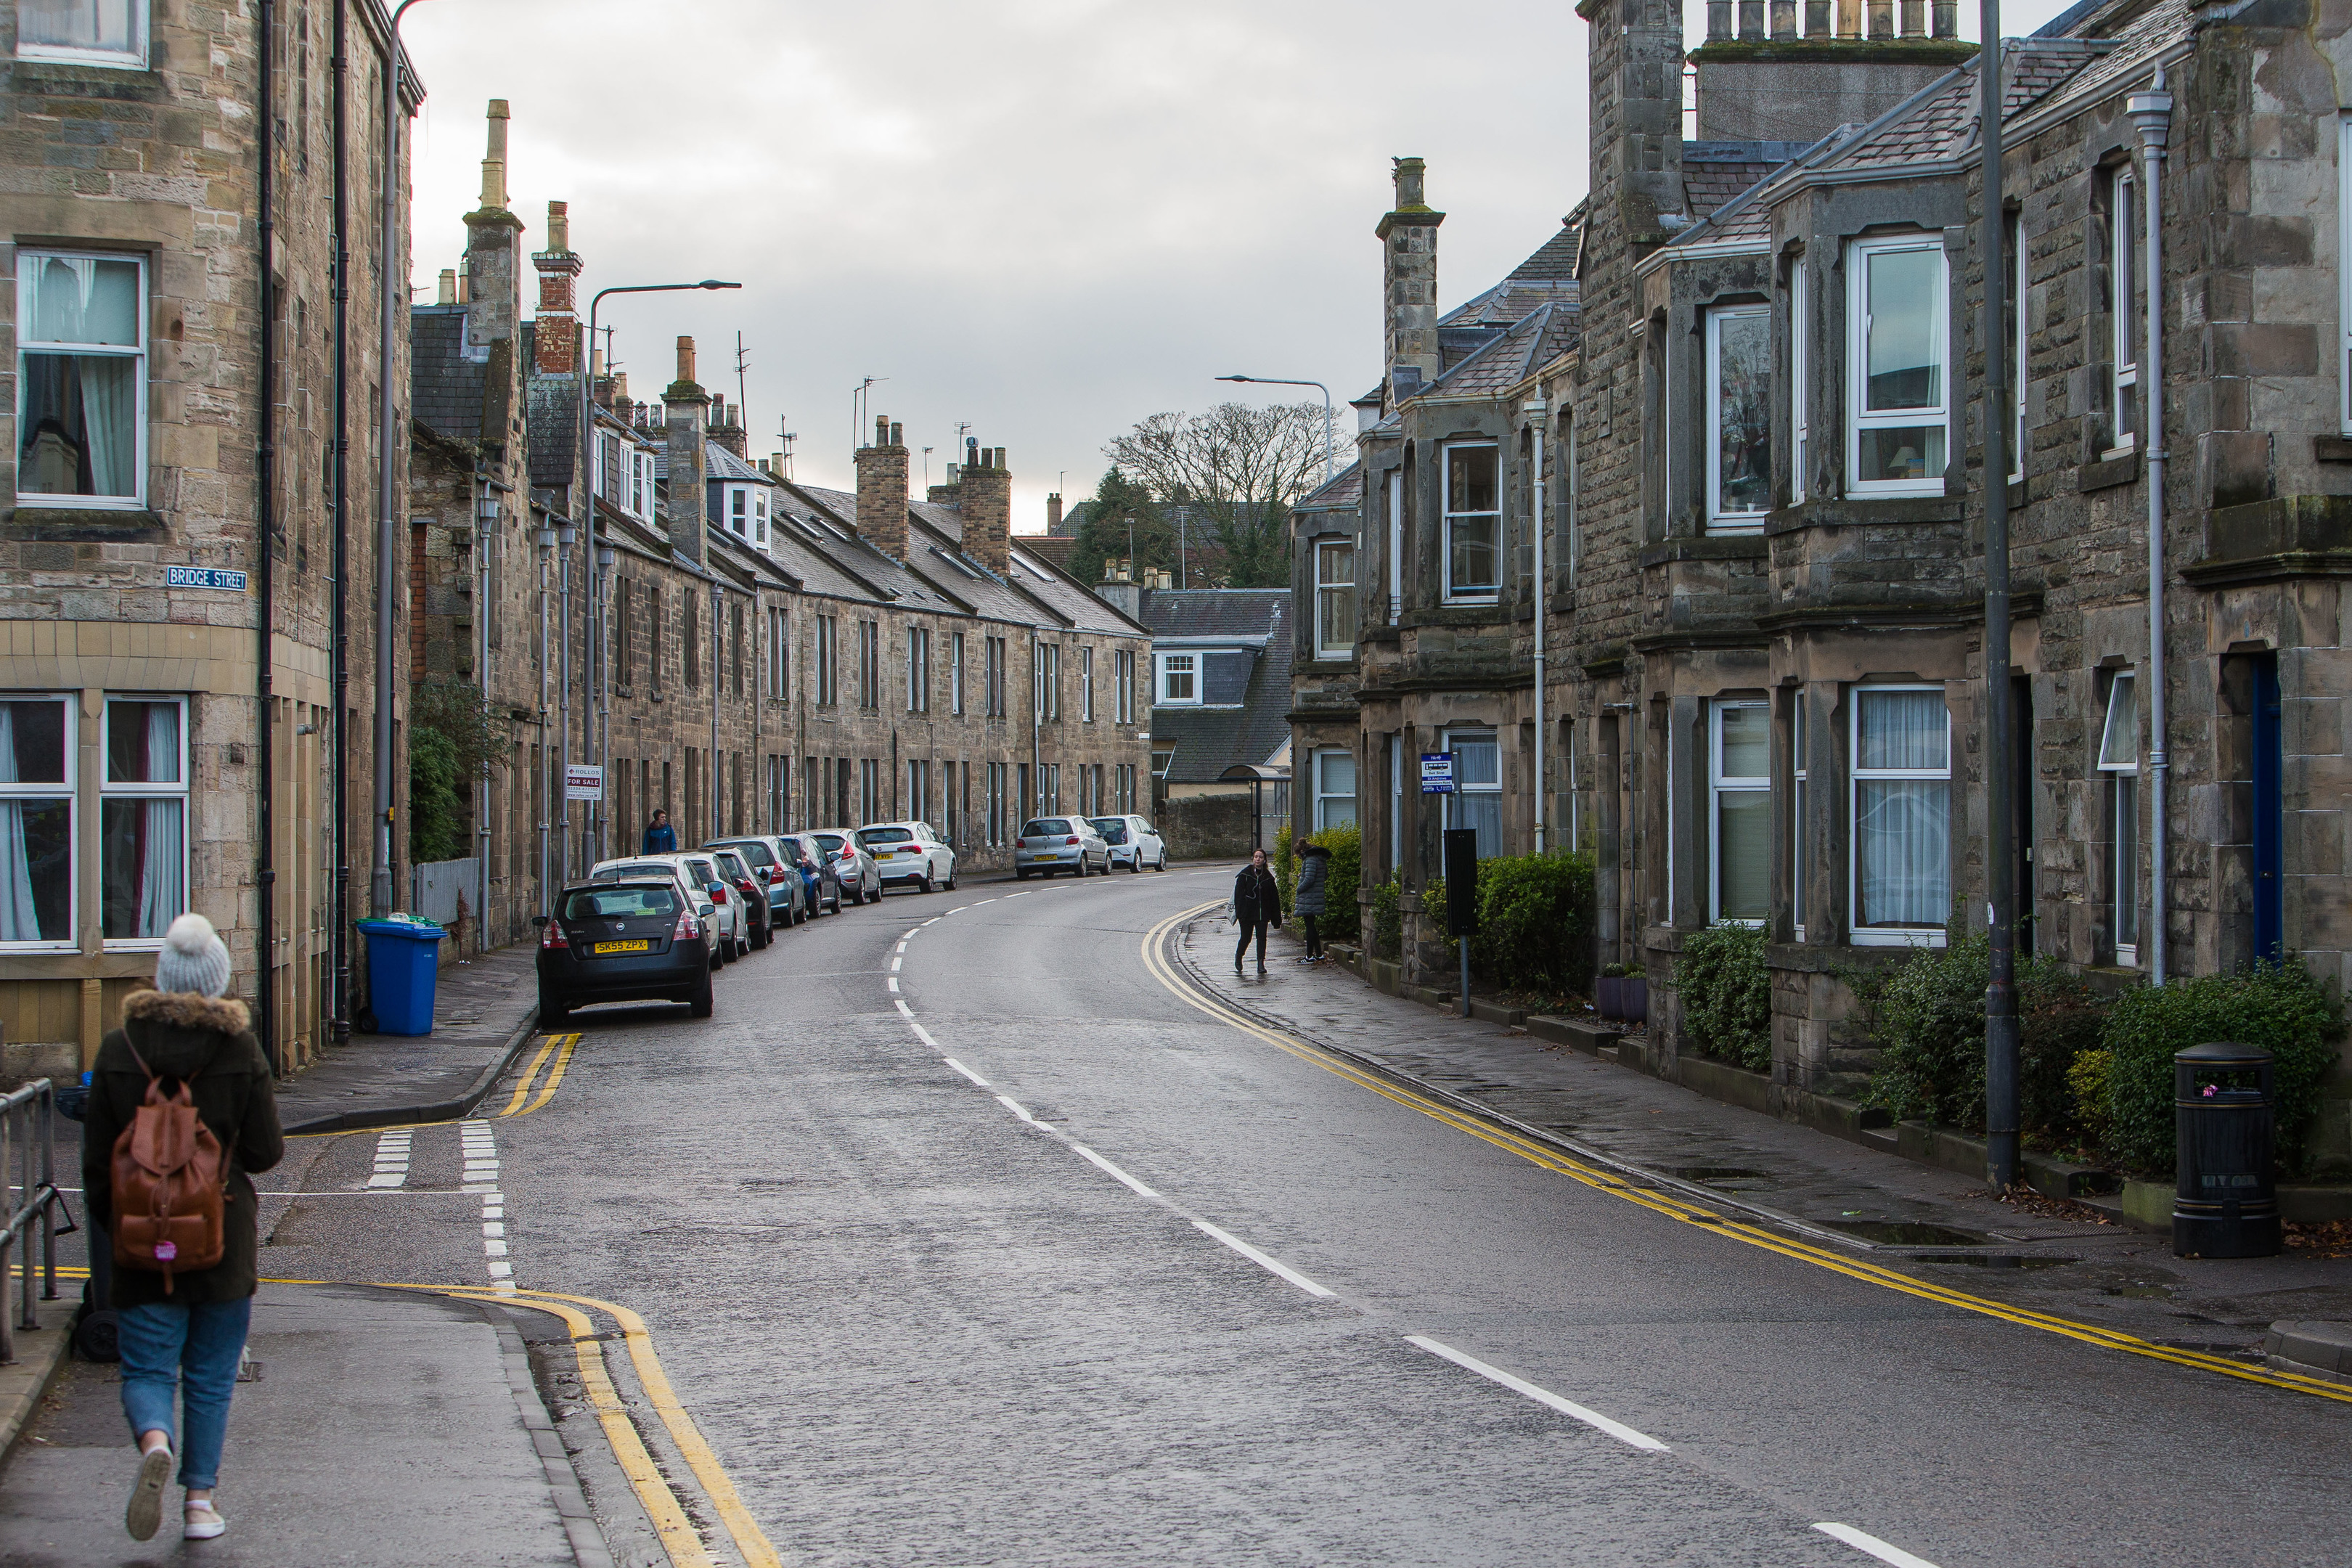 More than half of the homes in Bridge Street in St Andrews conservation area are HMOs.